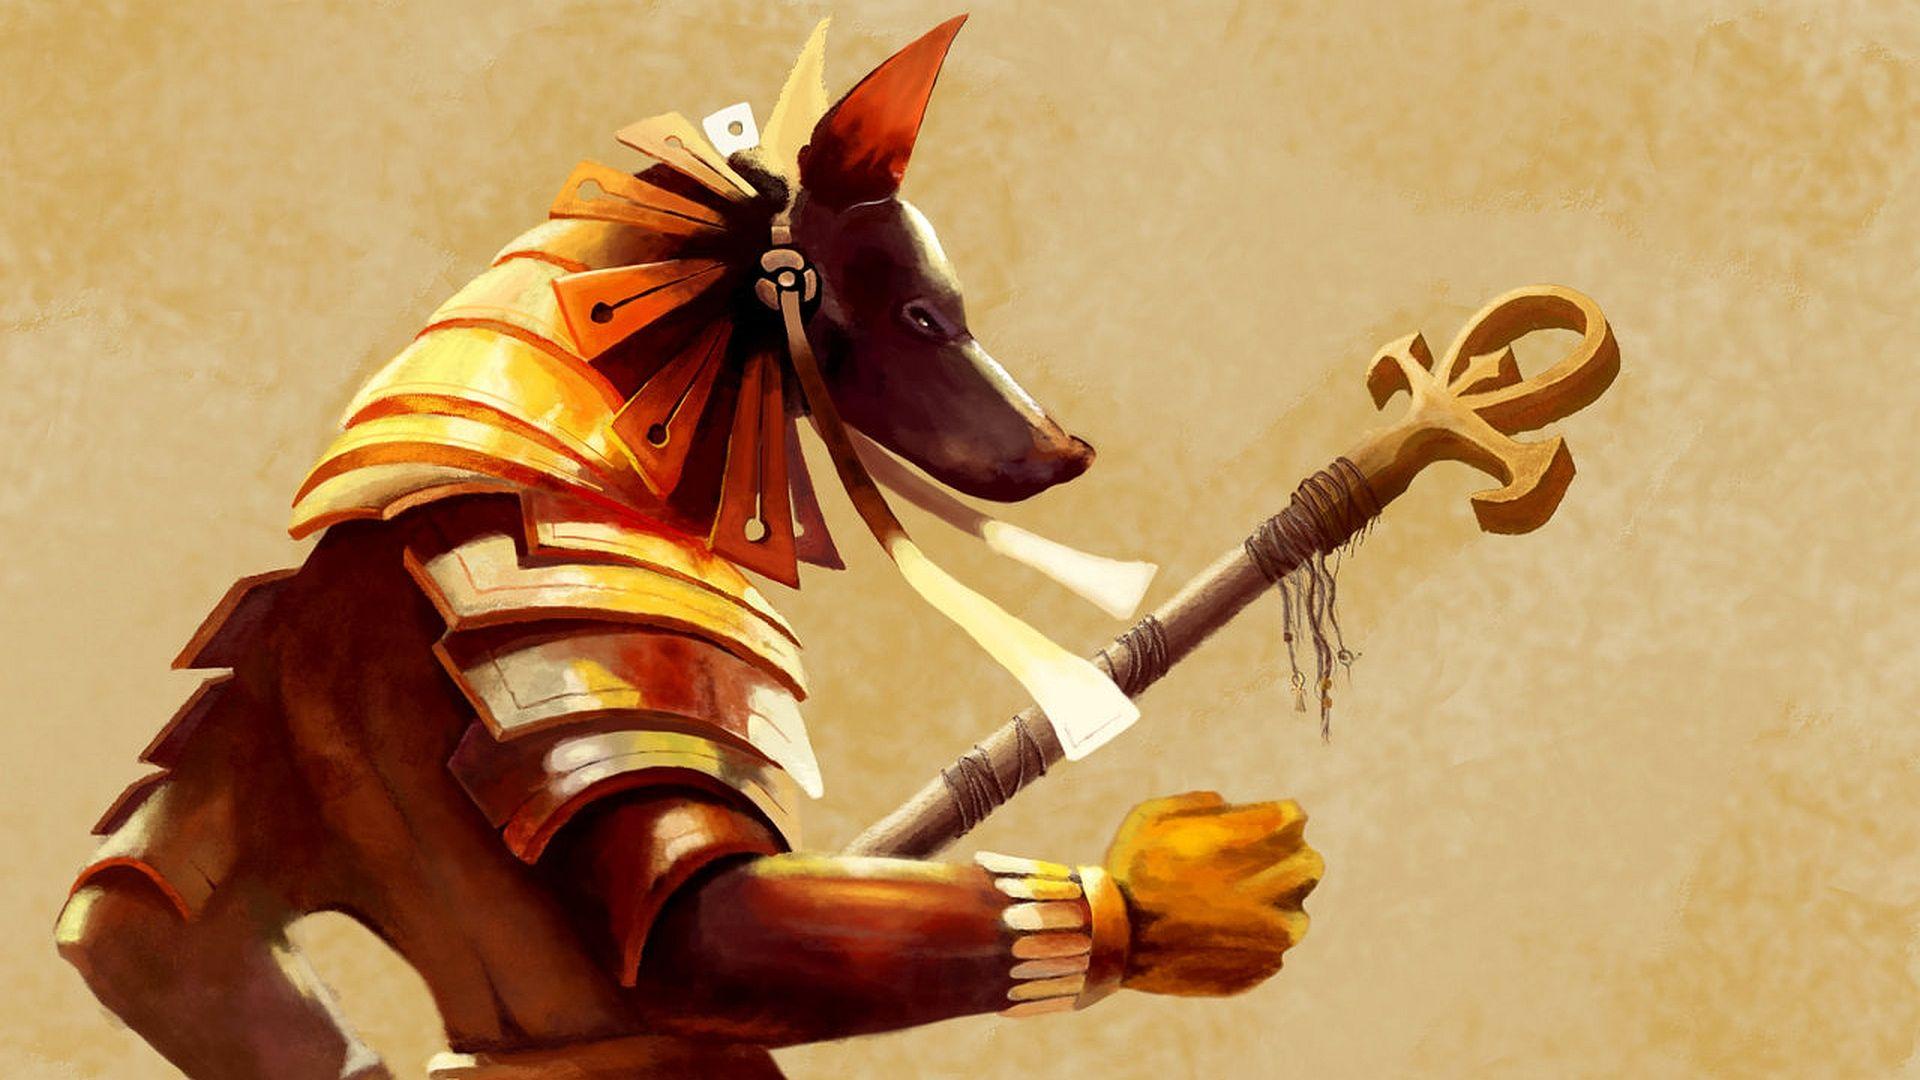 Anubis Wallpaper for PC. Full HD Picture